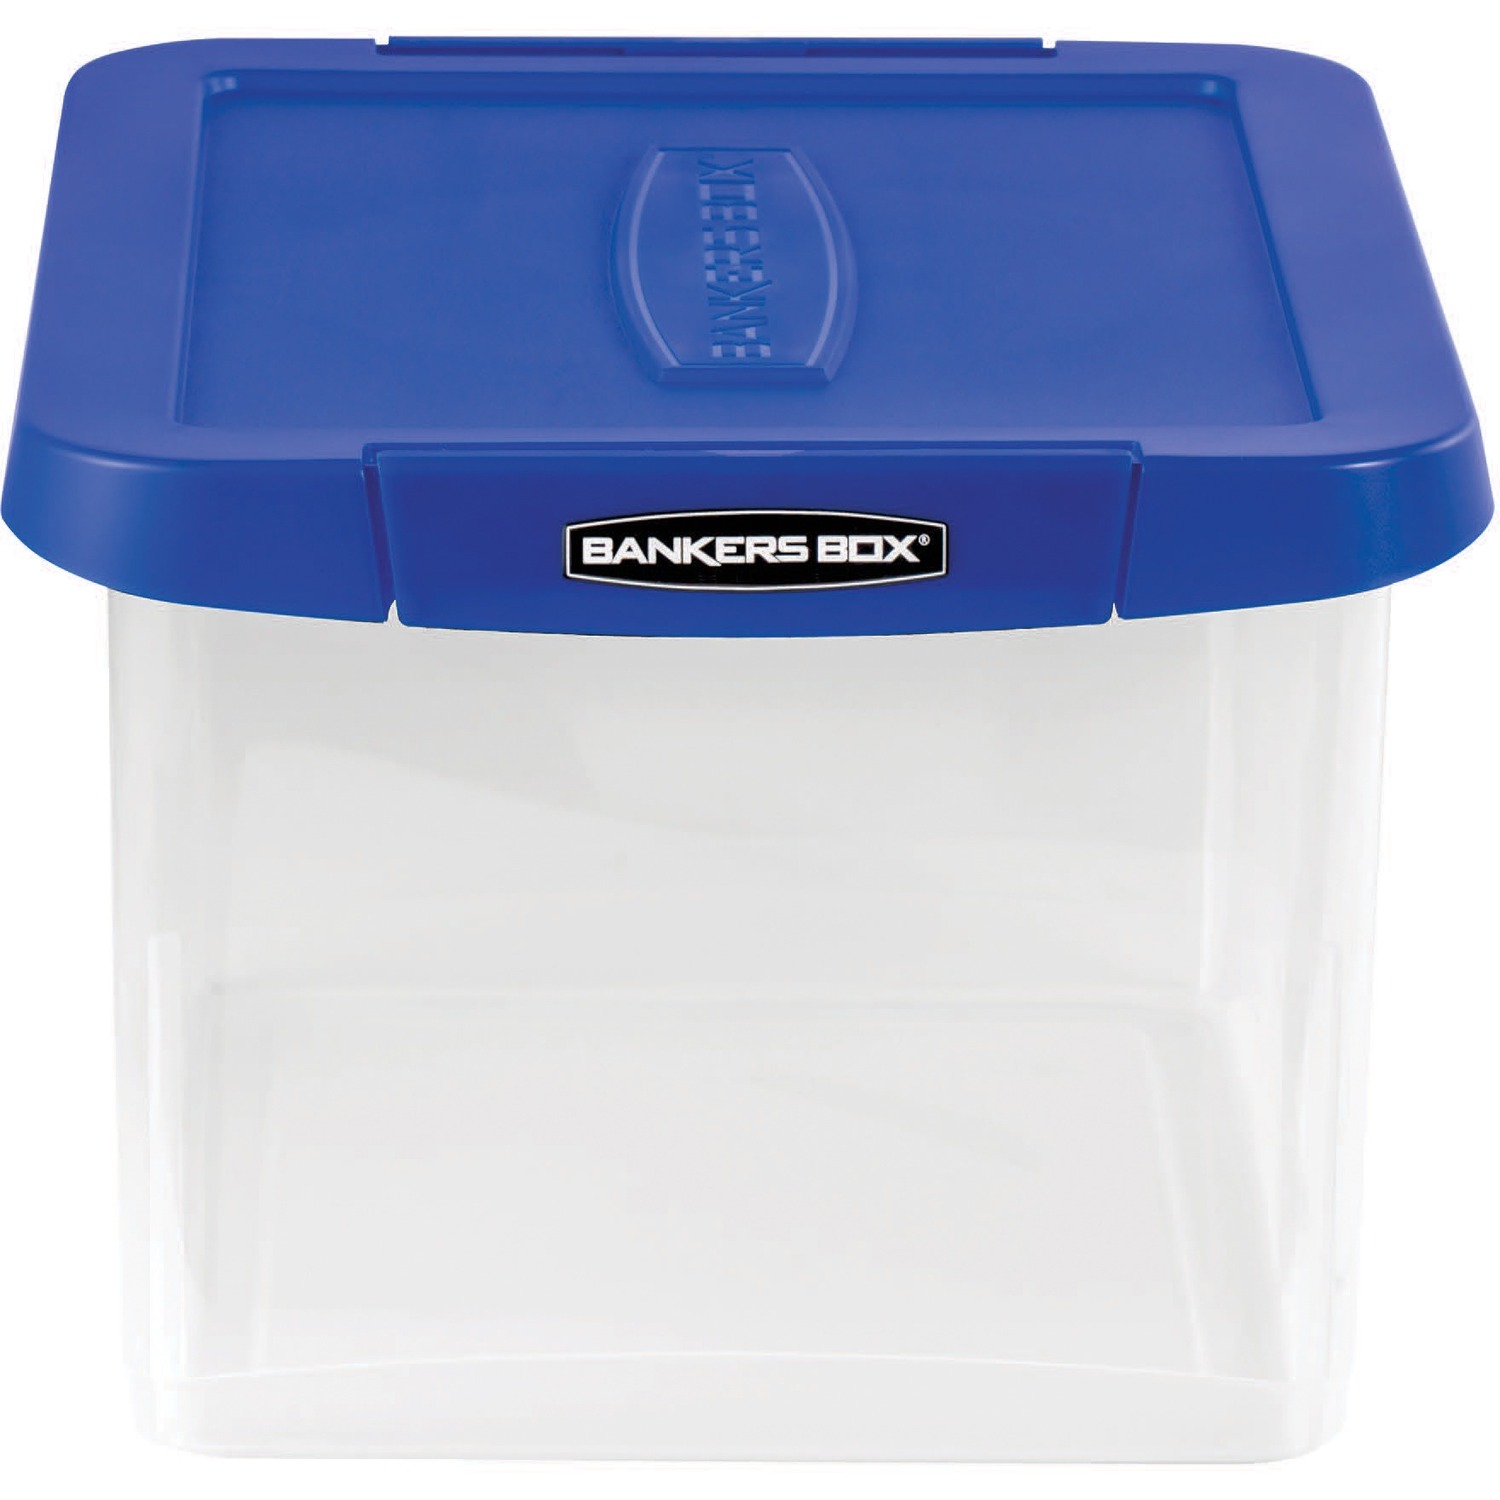 Bankers Box Storage Case - Each